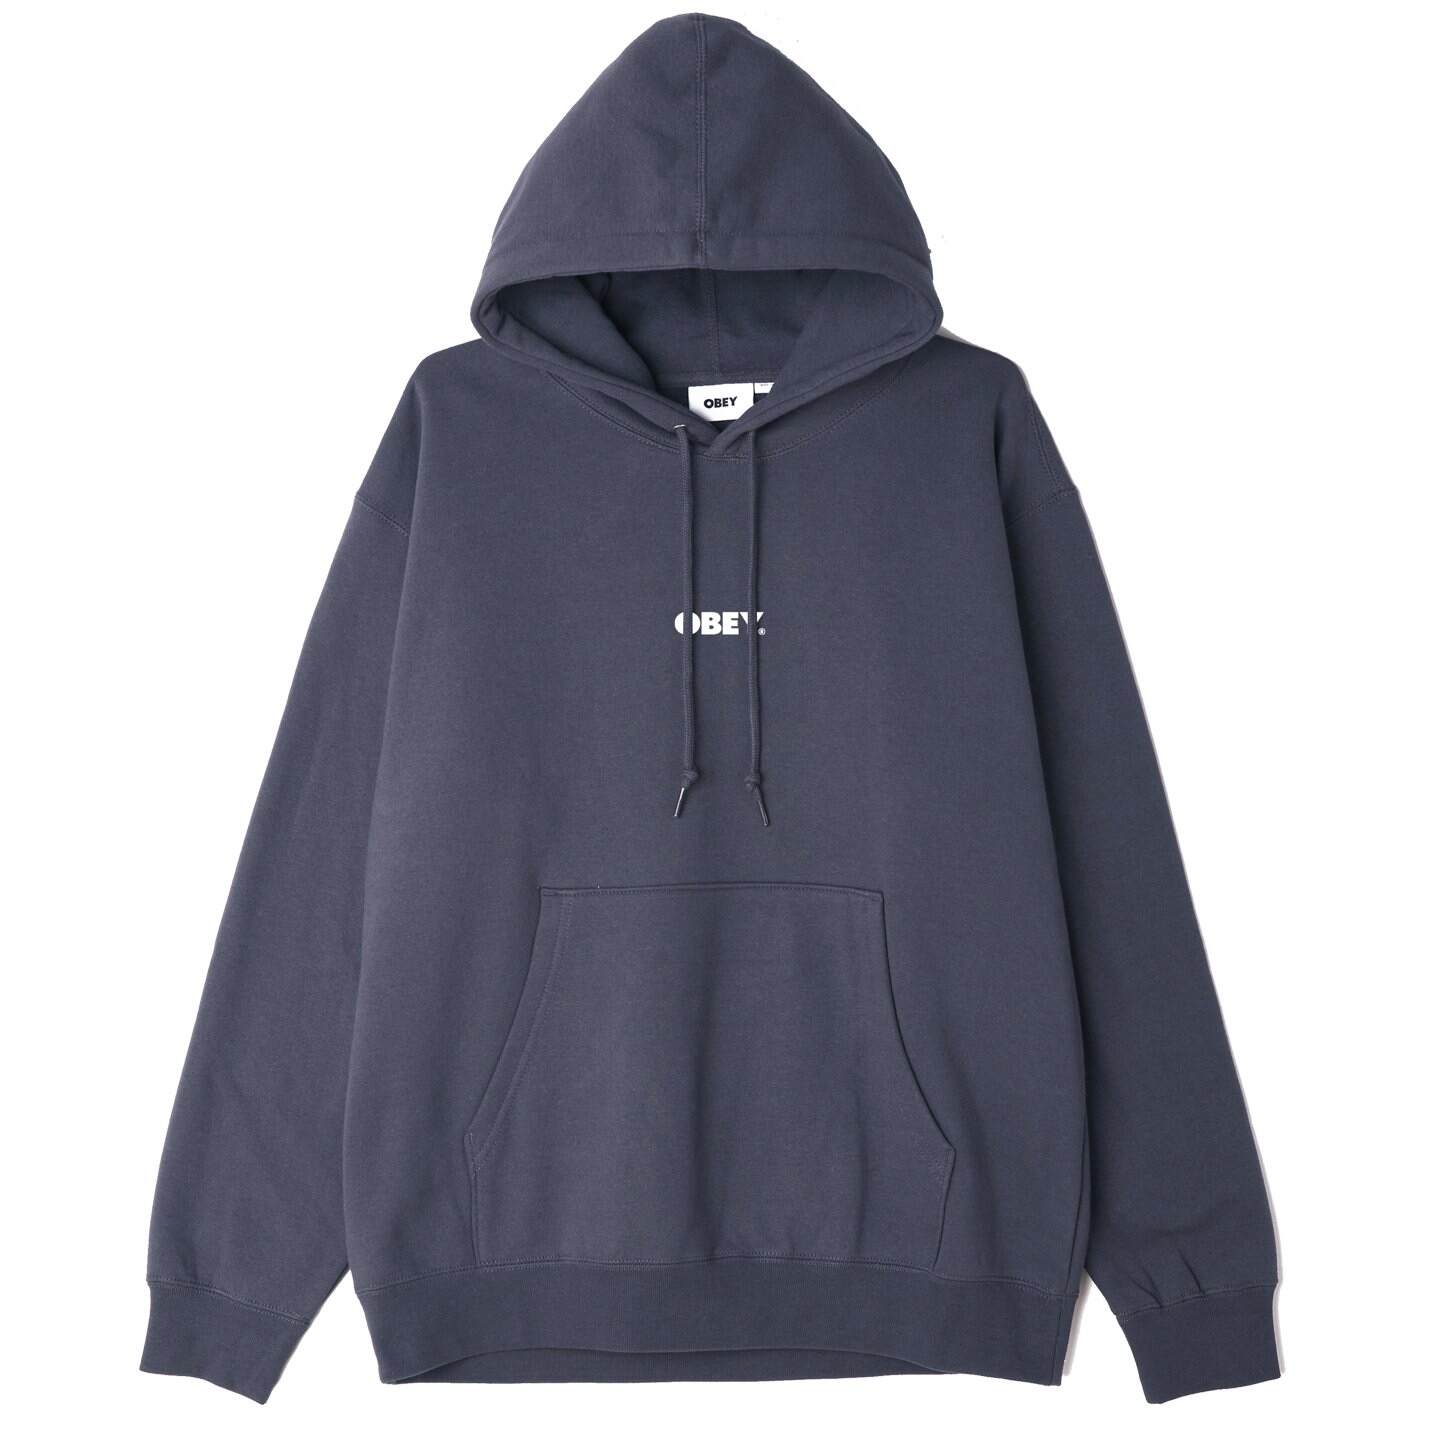 OBEY - Bold Mini Premium Pullover Men's Hoodie, French Navy